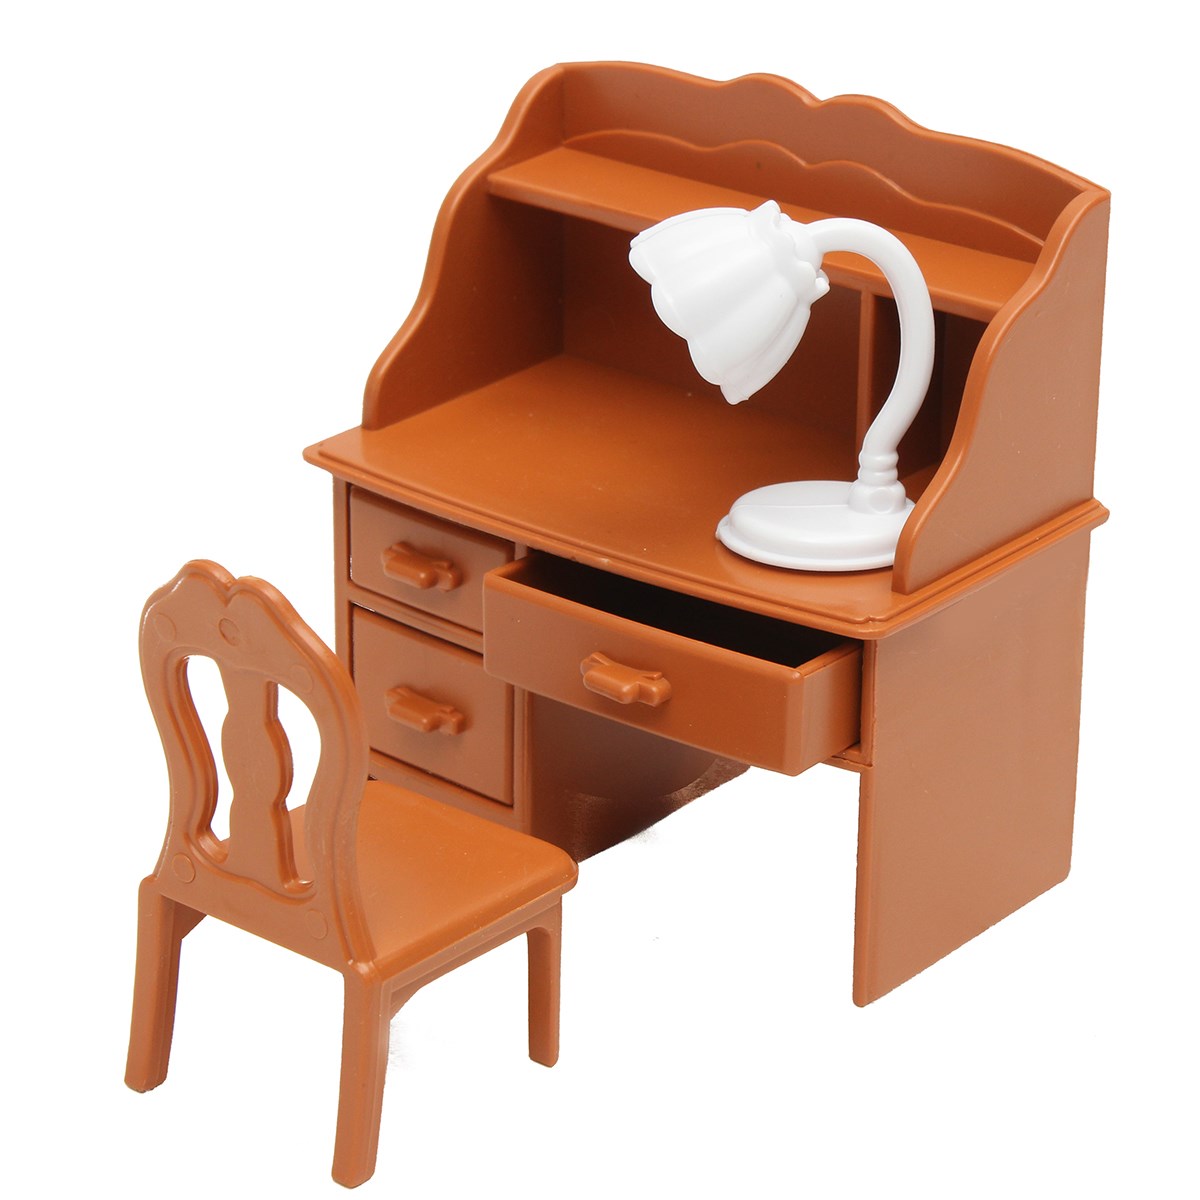 Miniature Living Room Dressing Table Furniture Sets For Mini Children DollHouse Home Decor Kids Toy Doll House Toys Gift